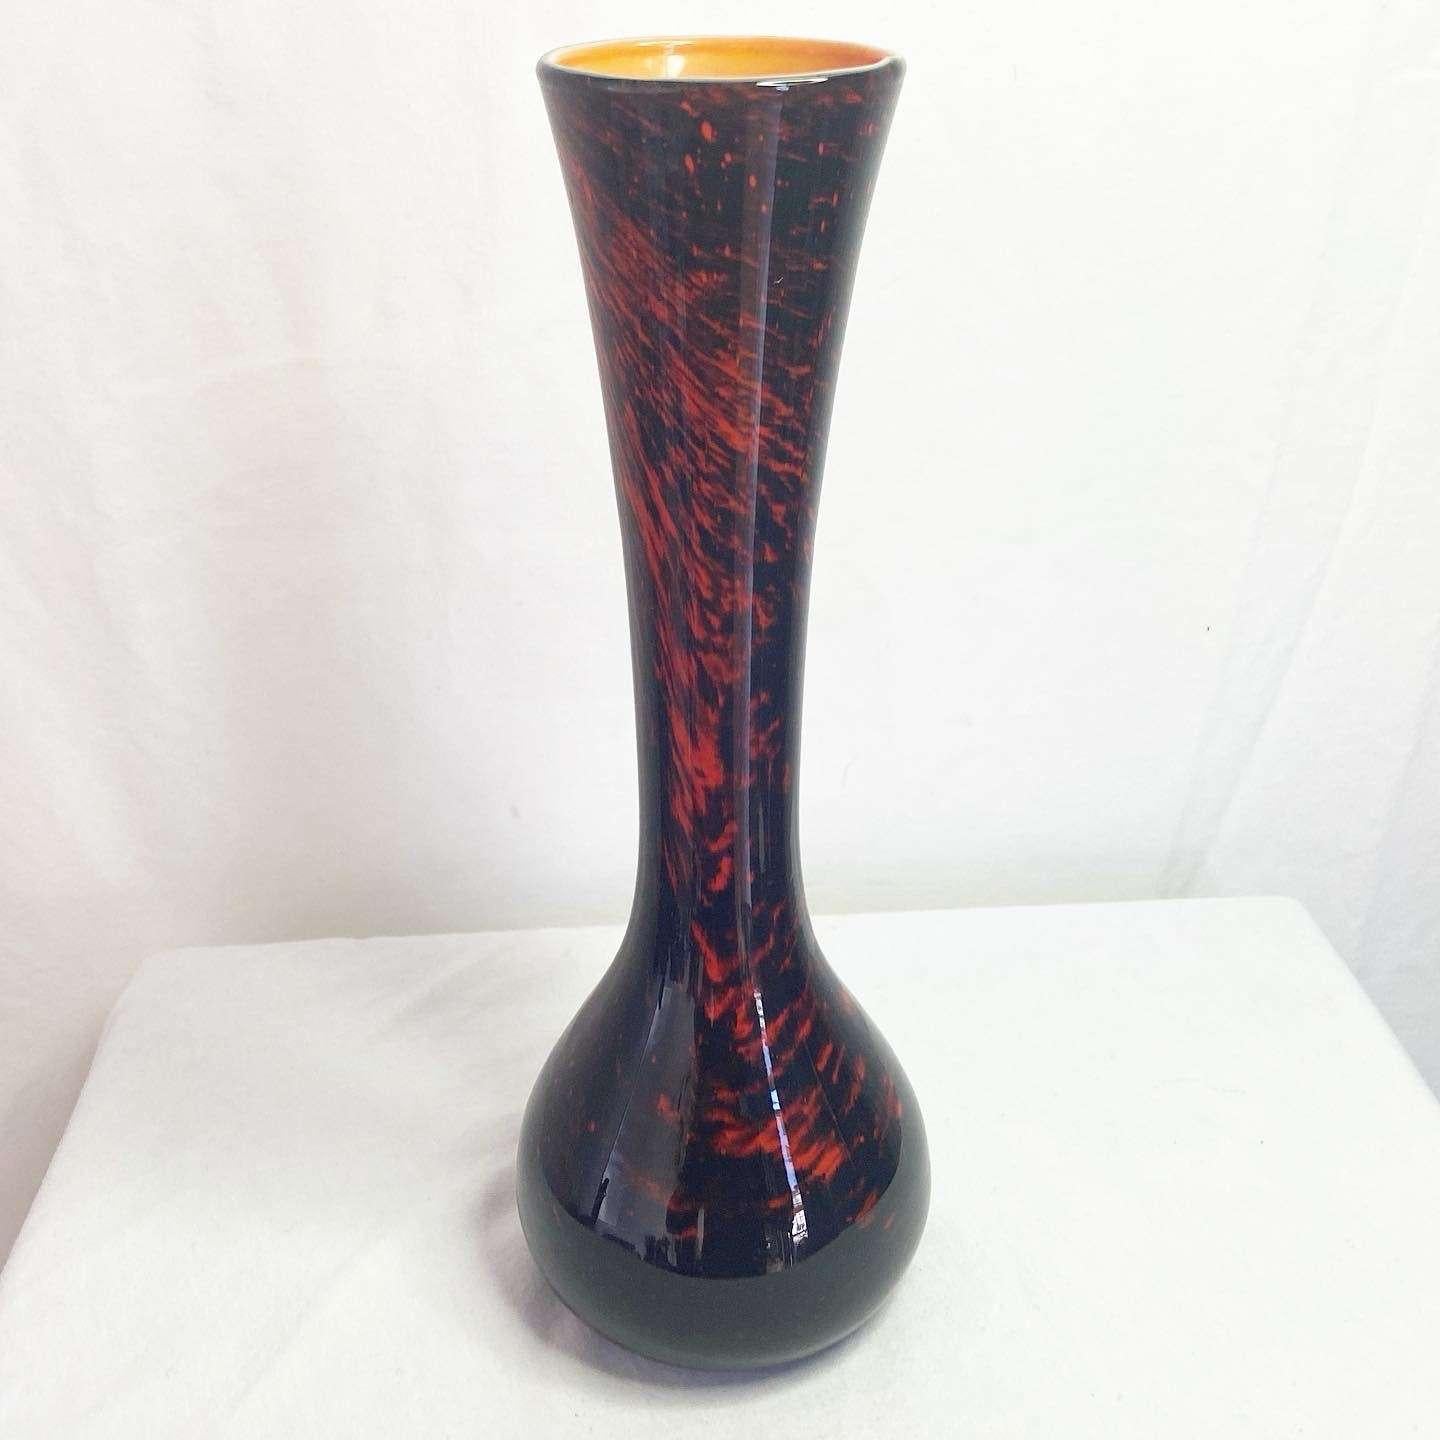 Amazing vintage glass vase. Displays a back a red glass exterior with an orange interior.
